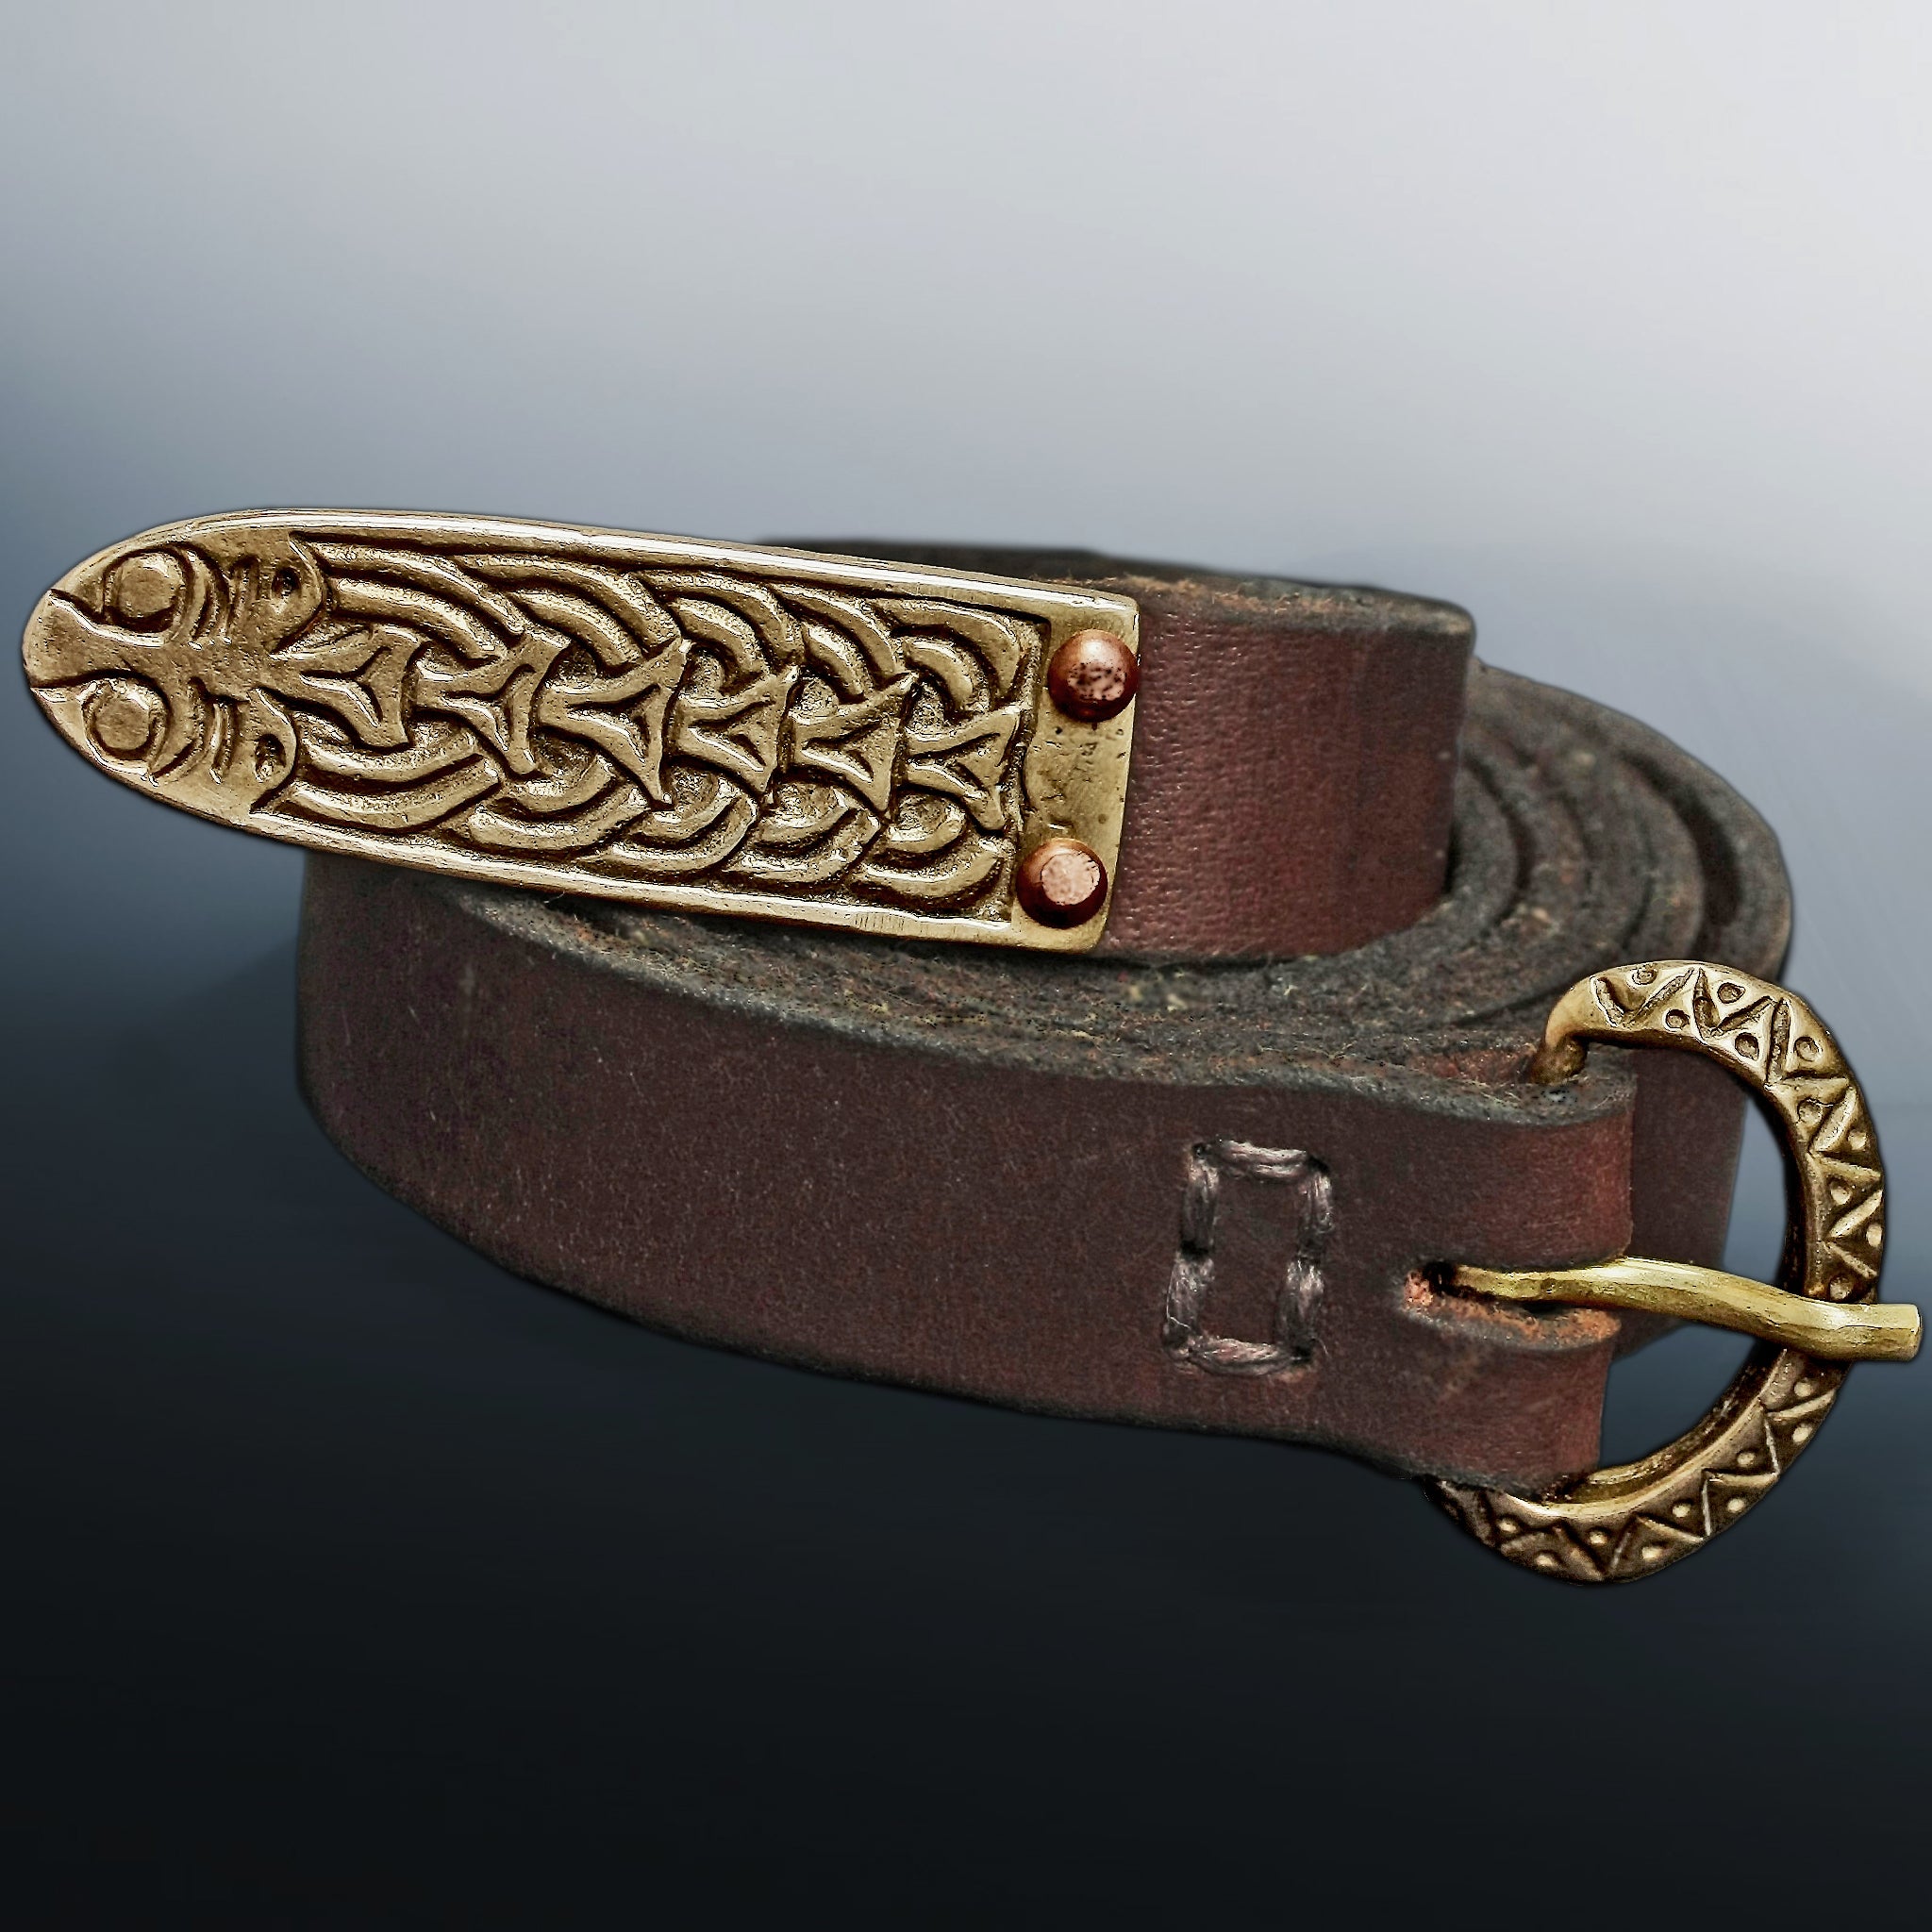 Large Viking Strap End Replica from Borre, Norway on Brown Leather Belt with Bronze Medieval Zig Zag Buckle